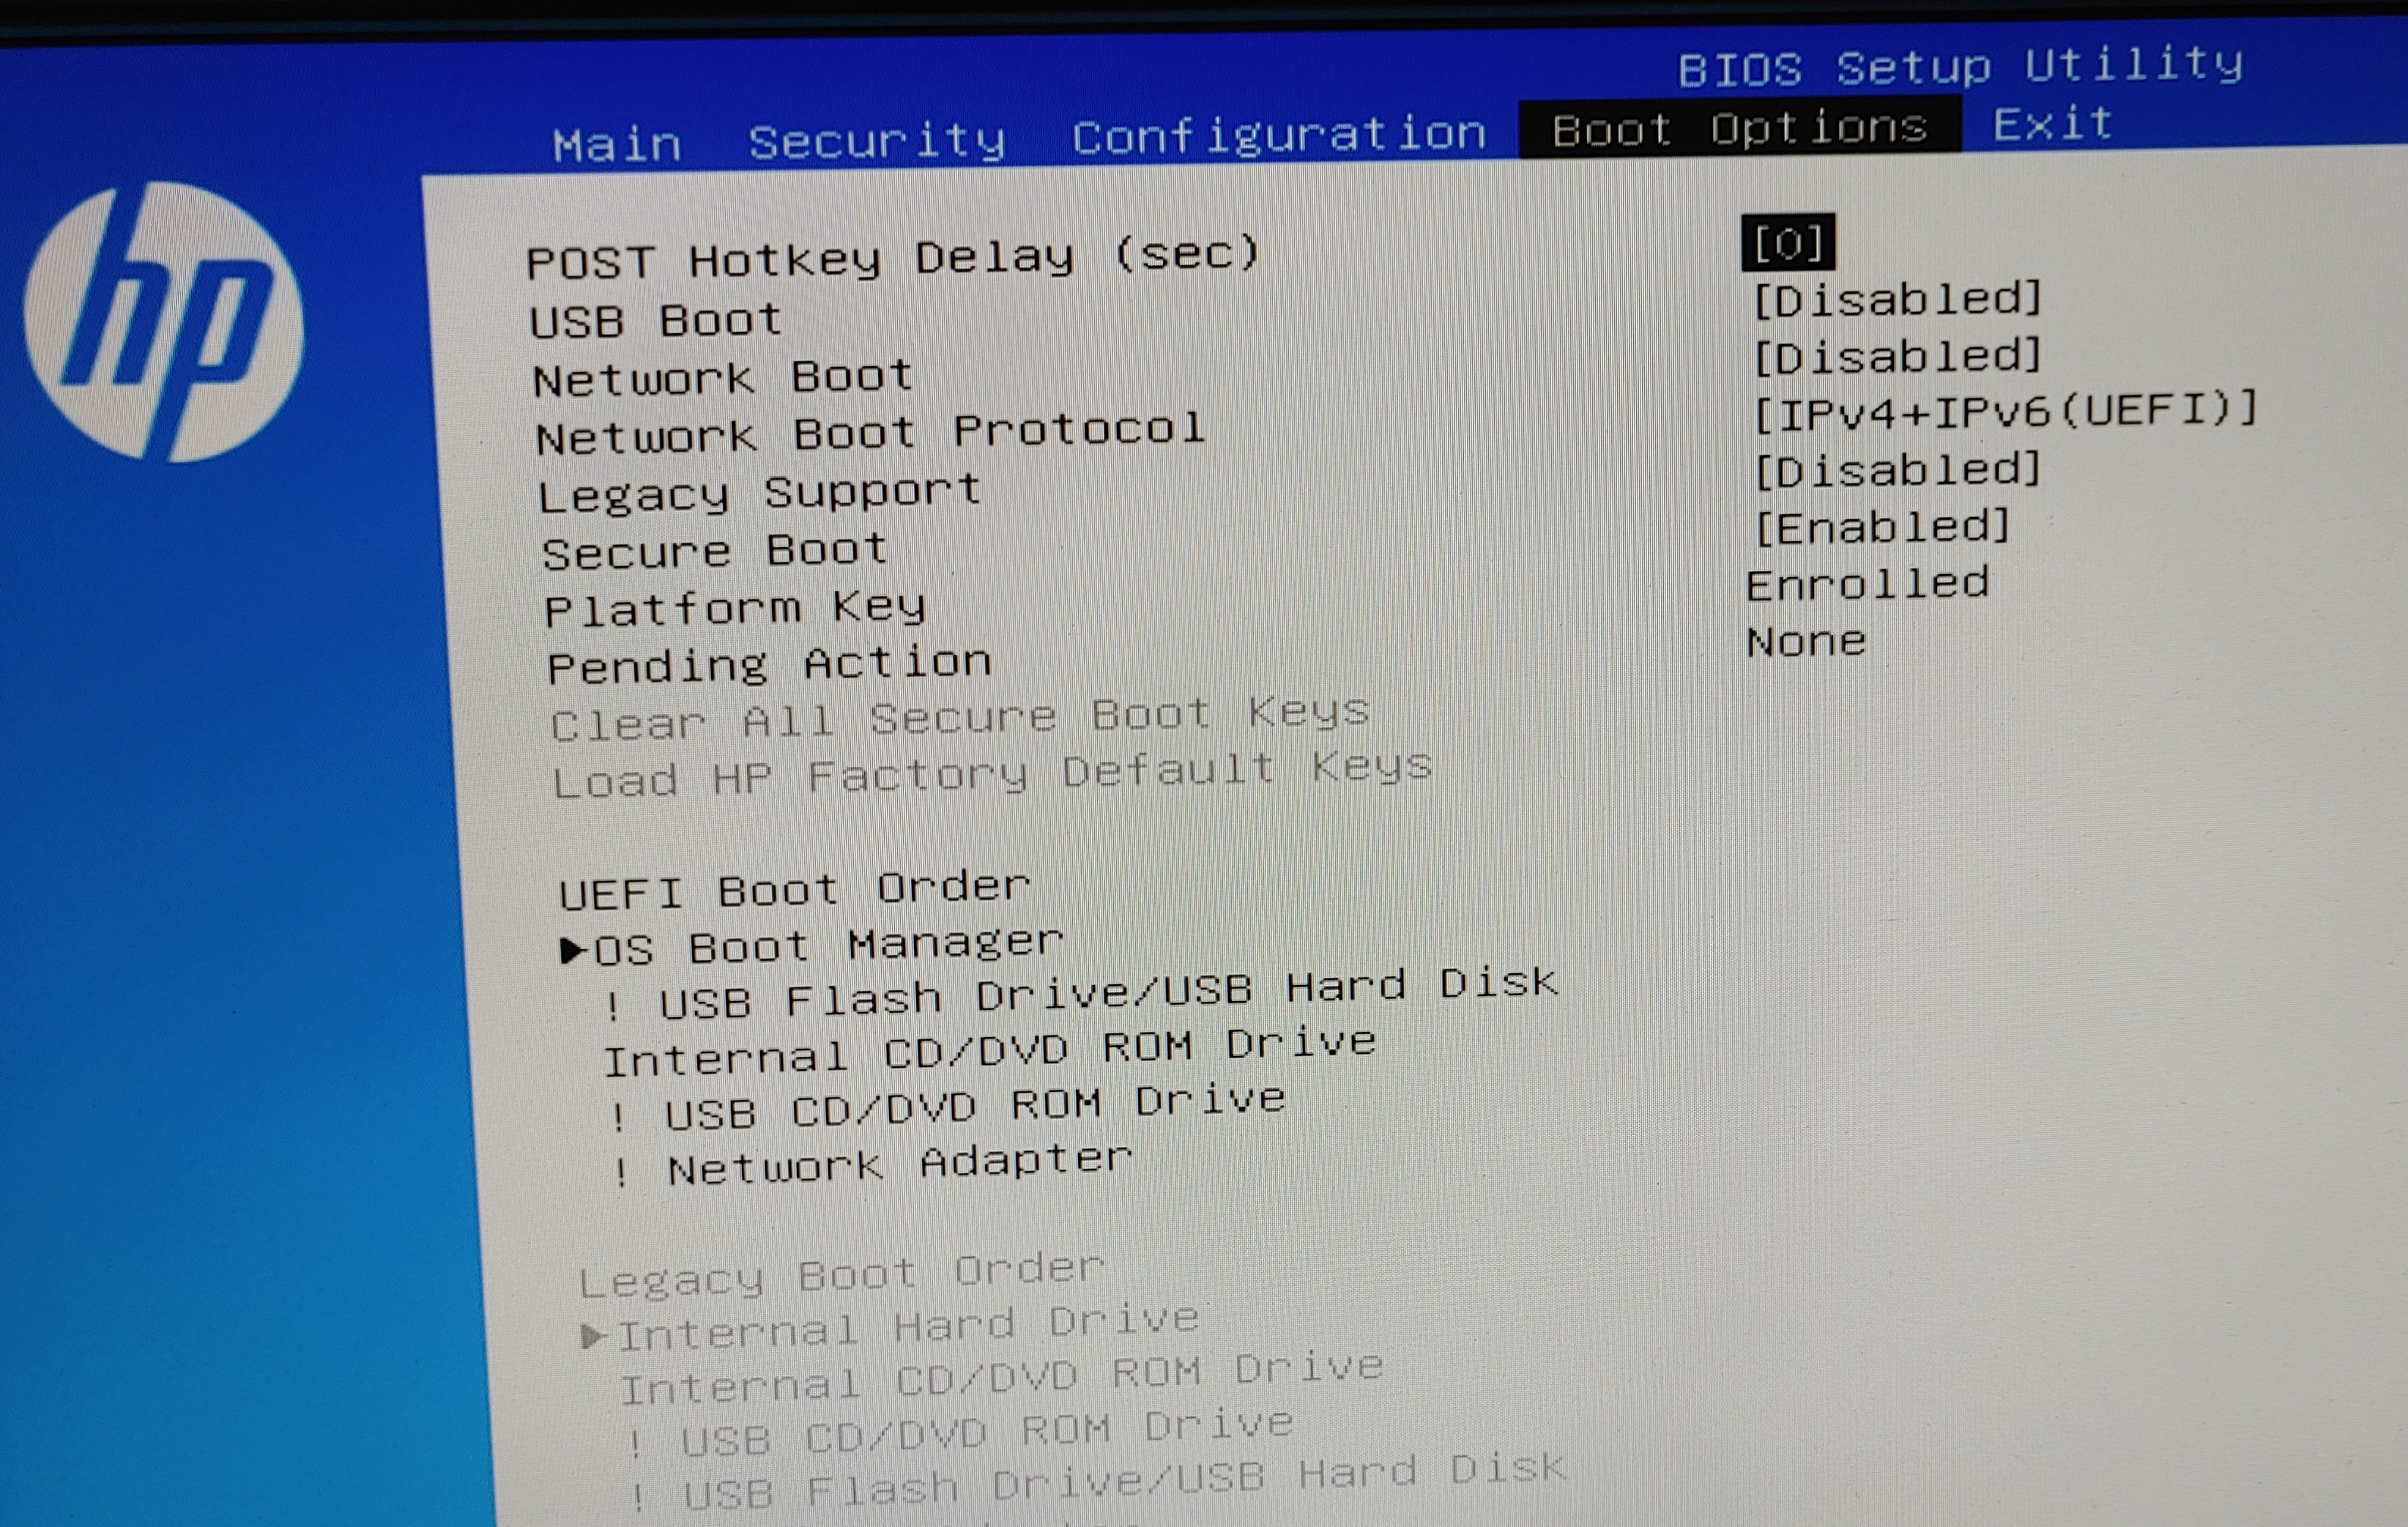 Disable one of the hard drive bios TG01 0009 desktop - HP Support Community - 8135610